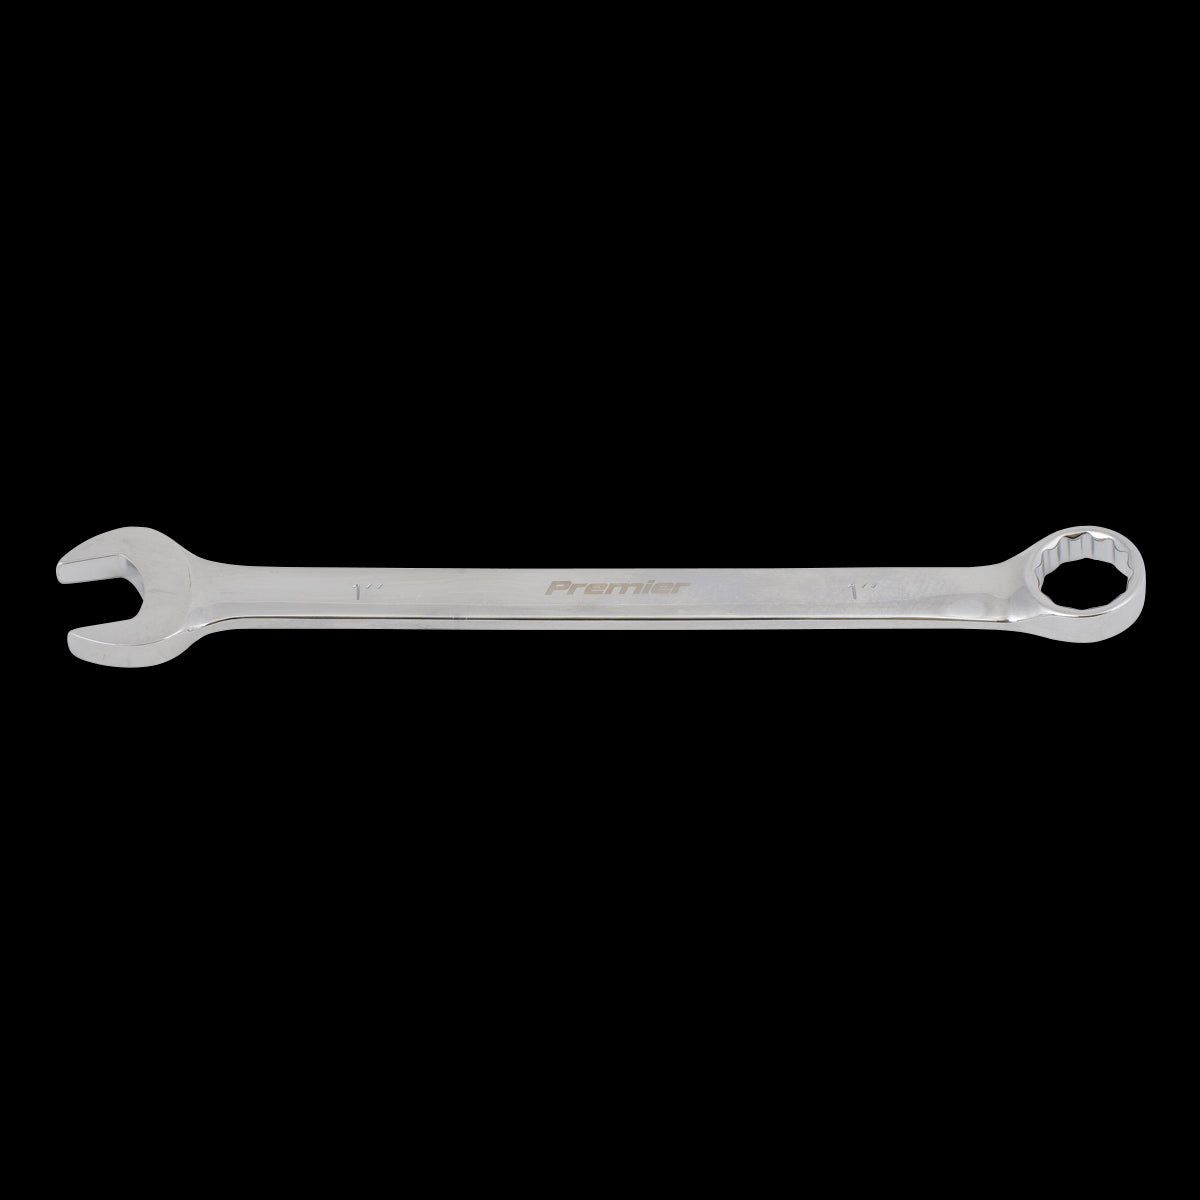 Sealey Premier Combination Spanner 1" - Imperial